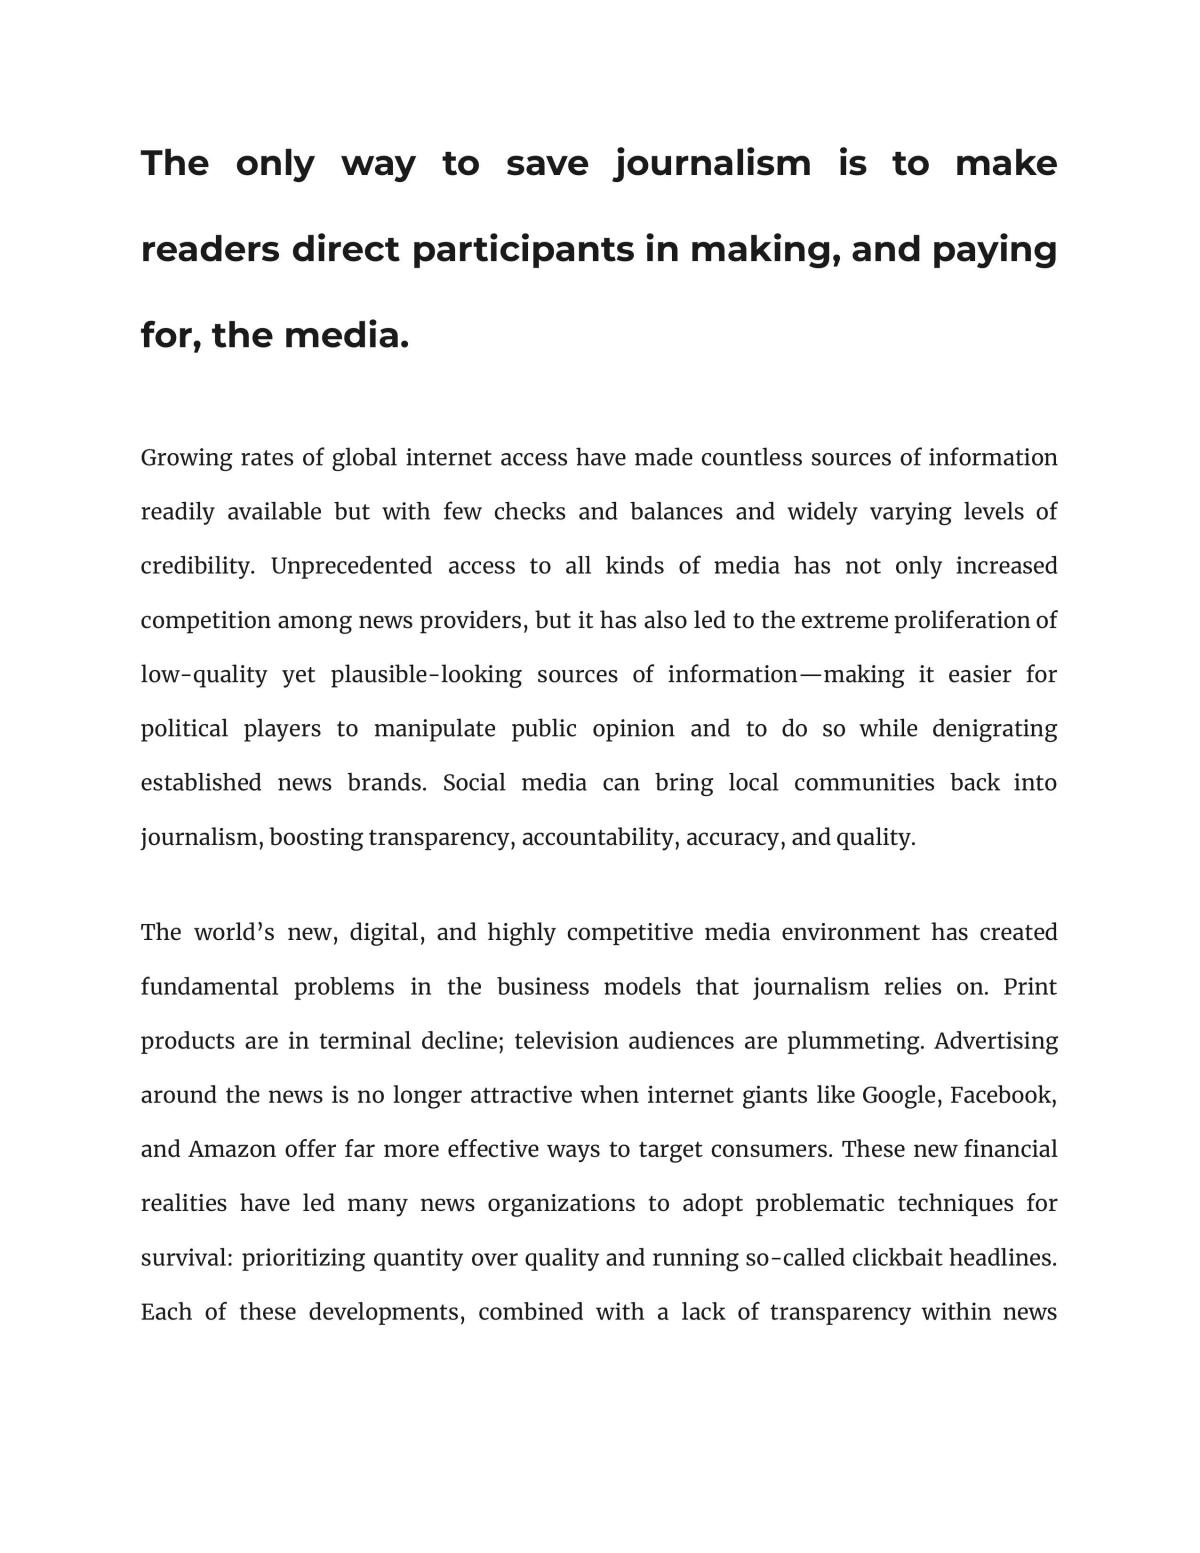 Is the only way to save journalism to make readers pay for media? - Page 1